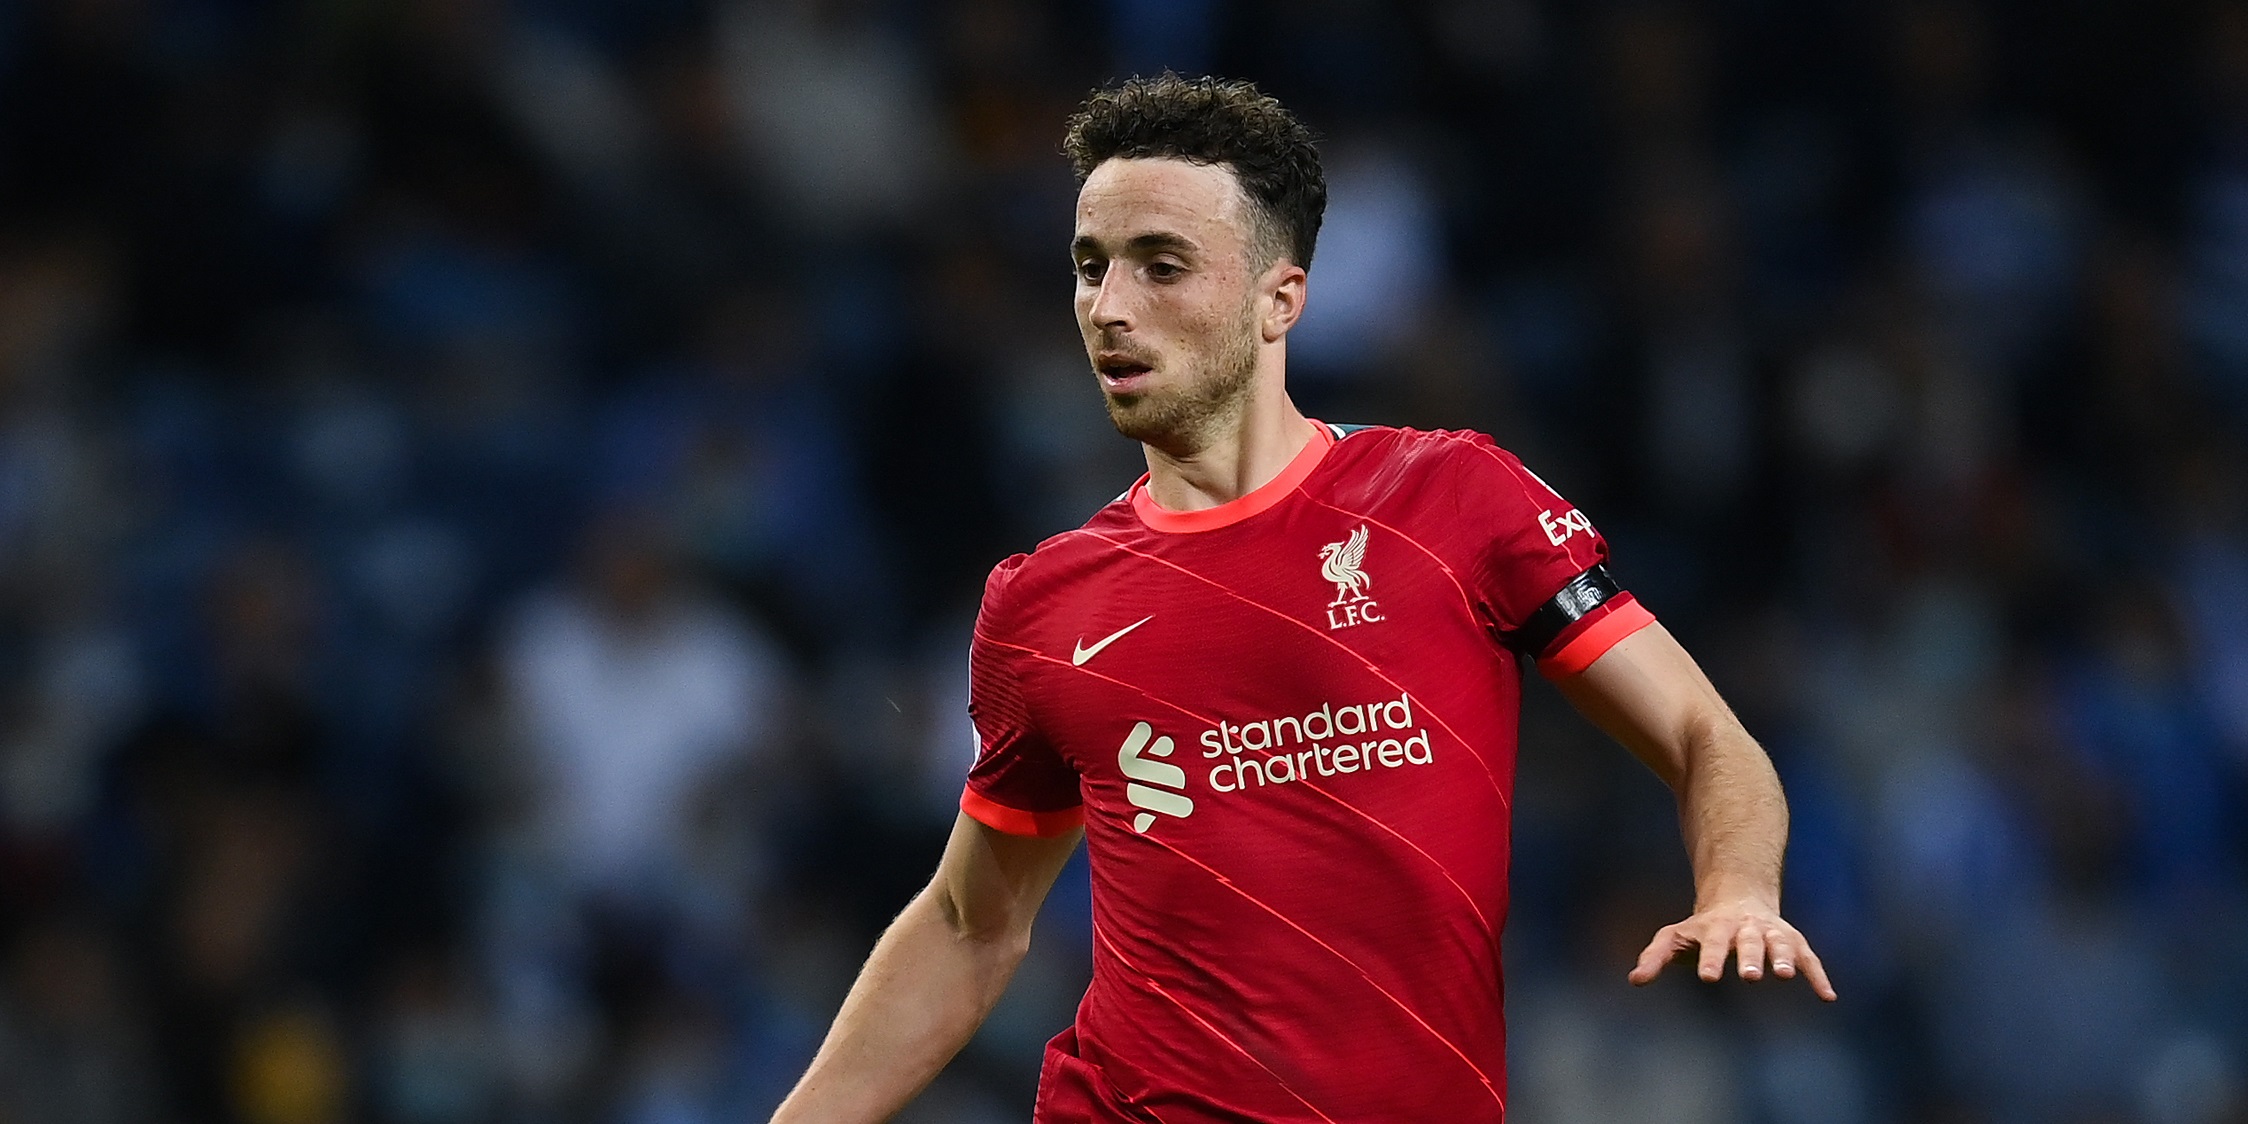 ‘He’s so clever’ – Pundit full of praise for Diogo Jota after impressive display against Spurs